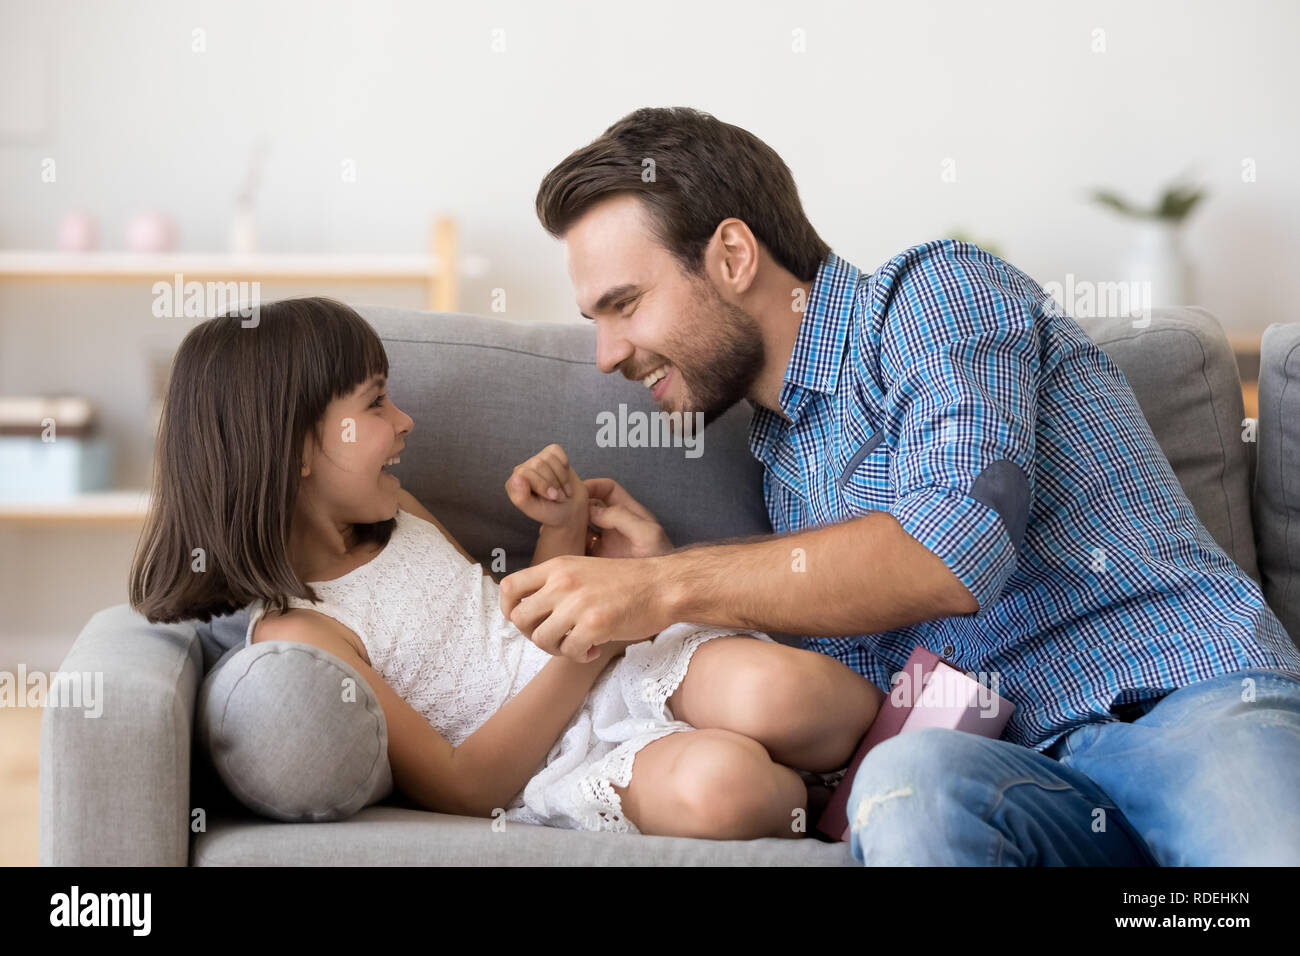 Happy daddy and cute daughter play together tickling on sofa Stock Photo